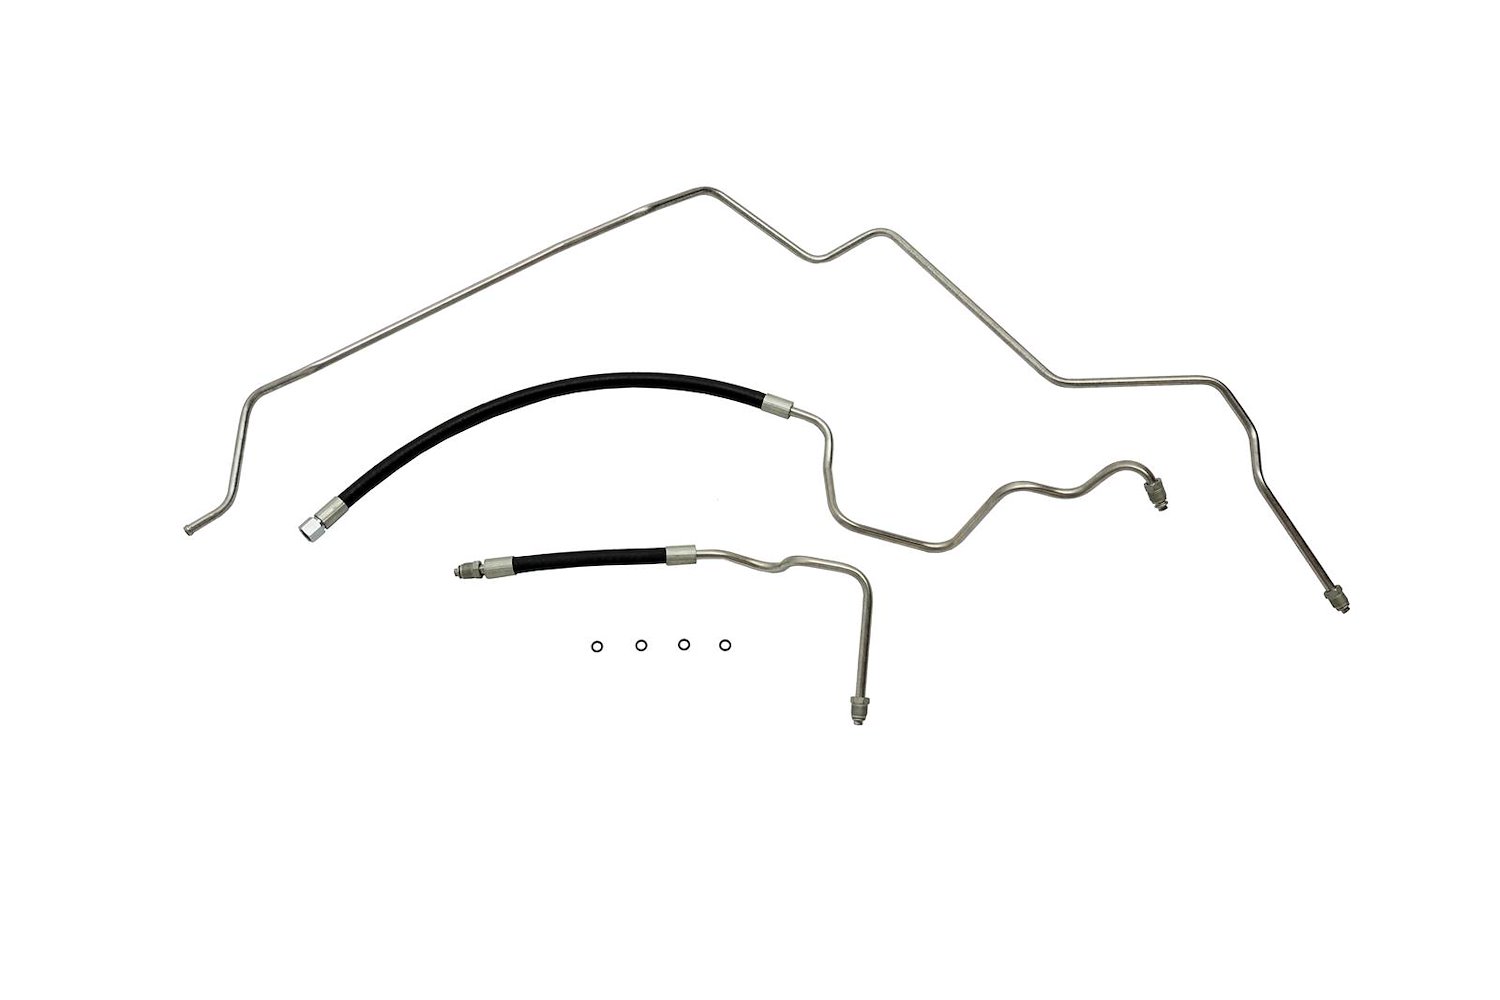 Chevy / GMC Pick Up Fuel Supply Line -1987